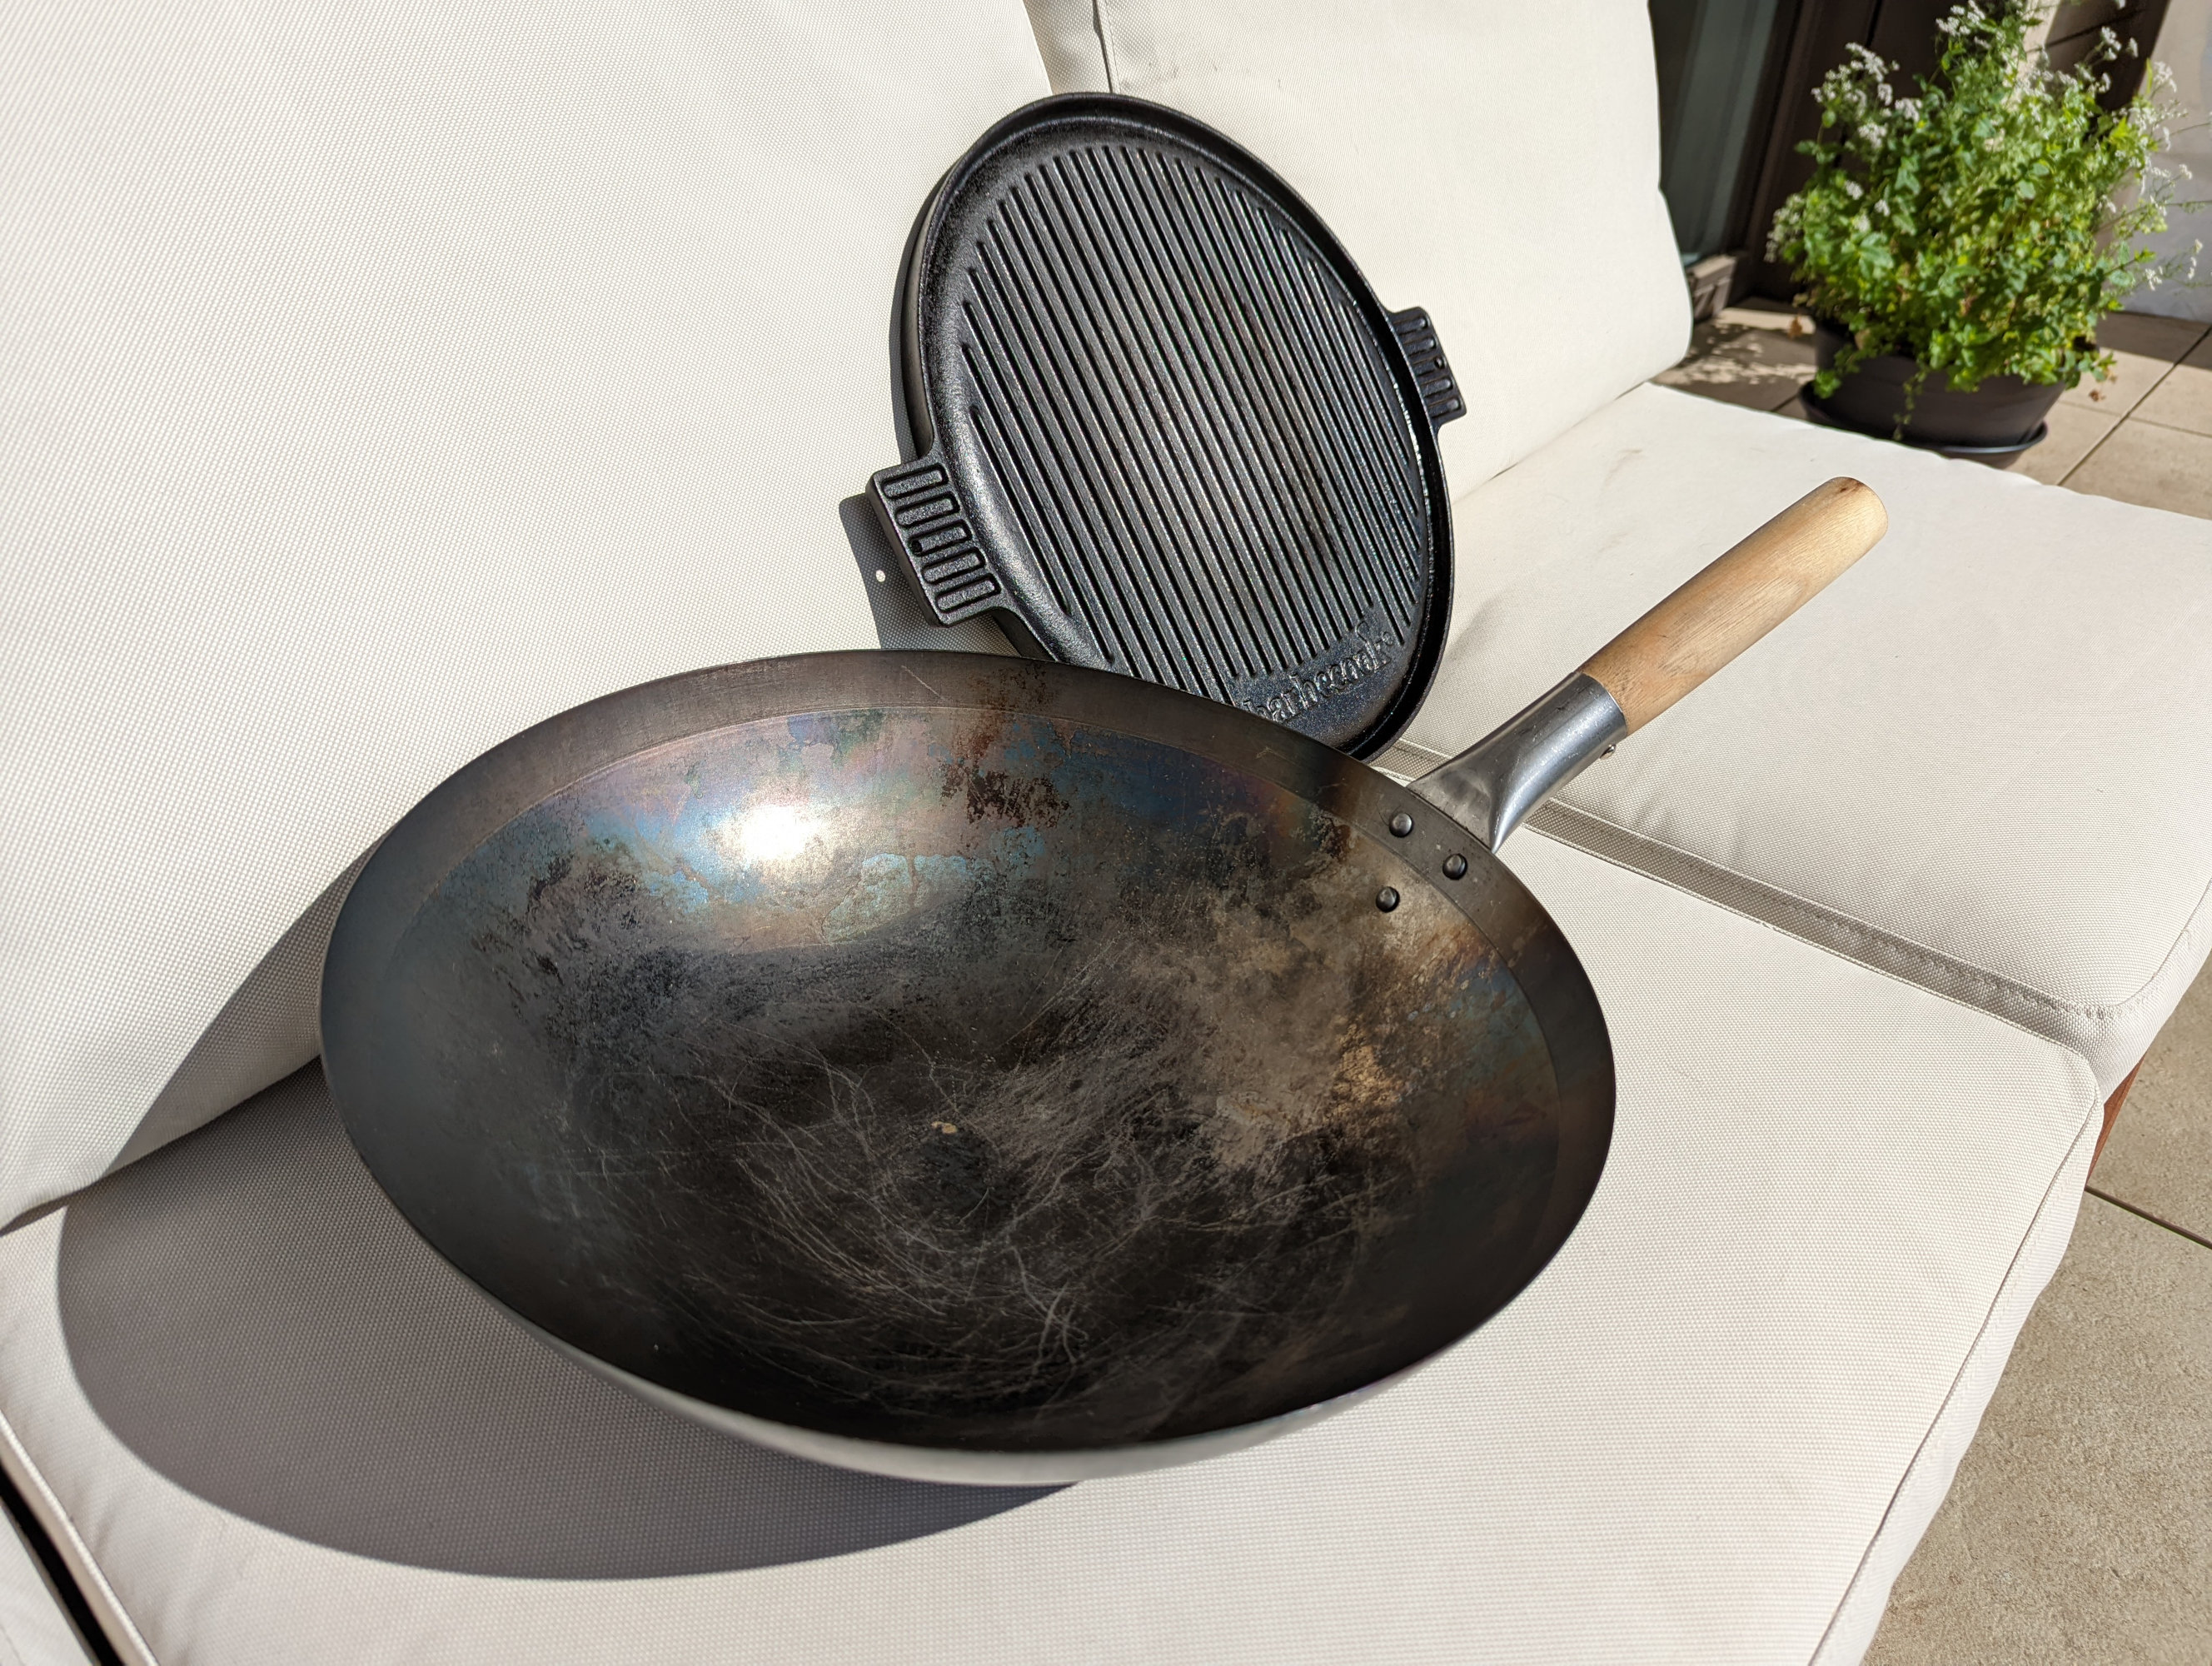 A photo of a wok with a single wooden handle and a round plancha resting next to each other.